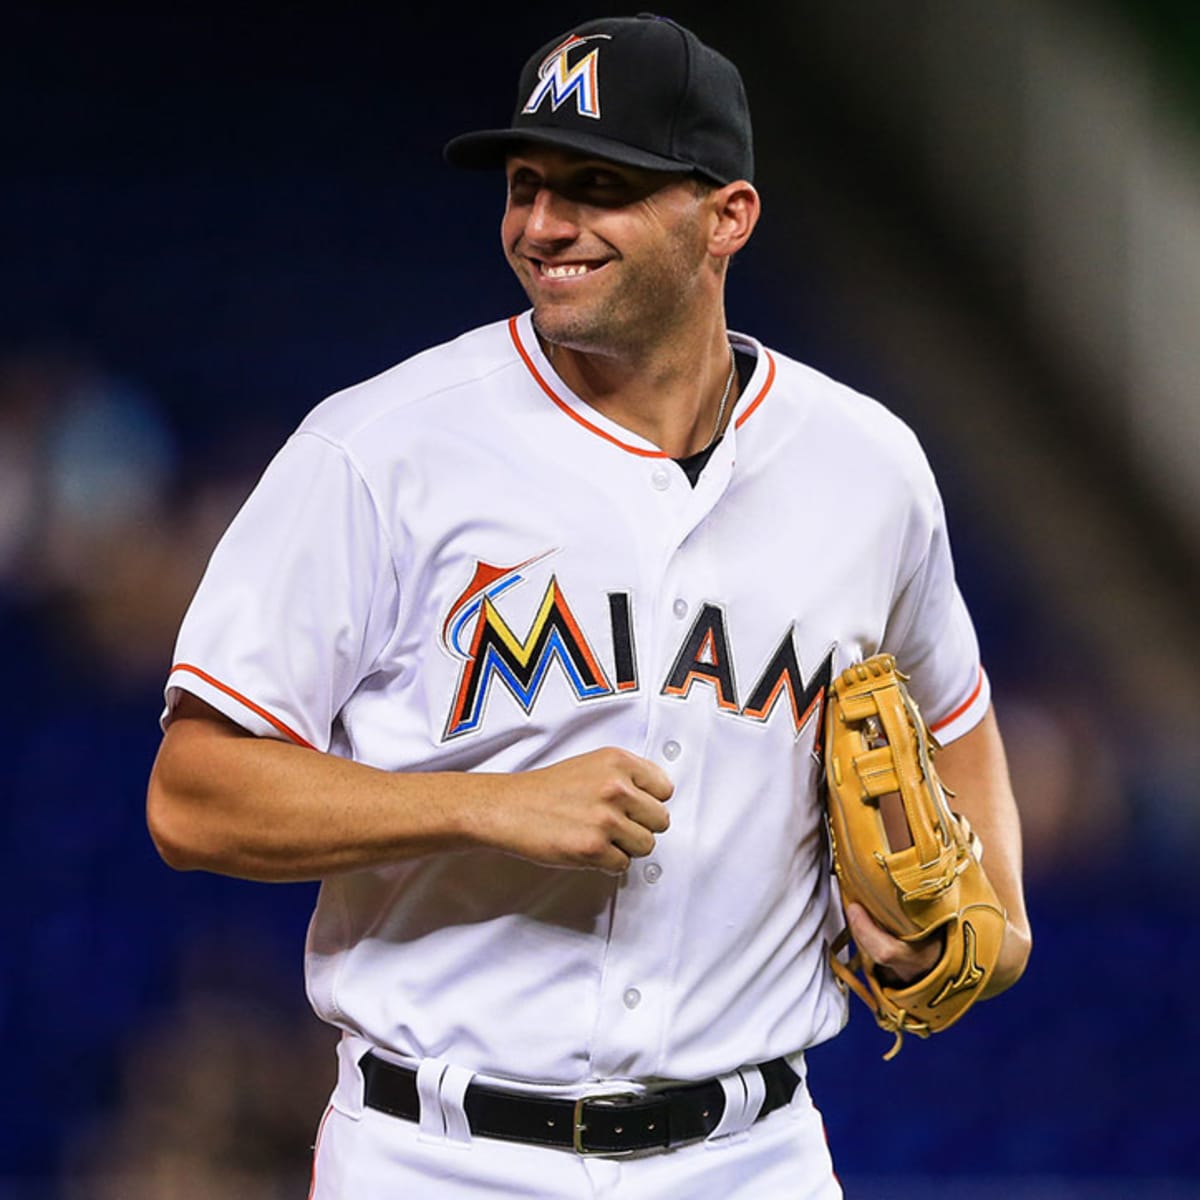 Jeff Francoeur returns to Braves with minor league deal